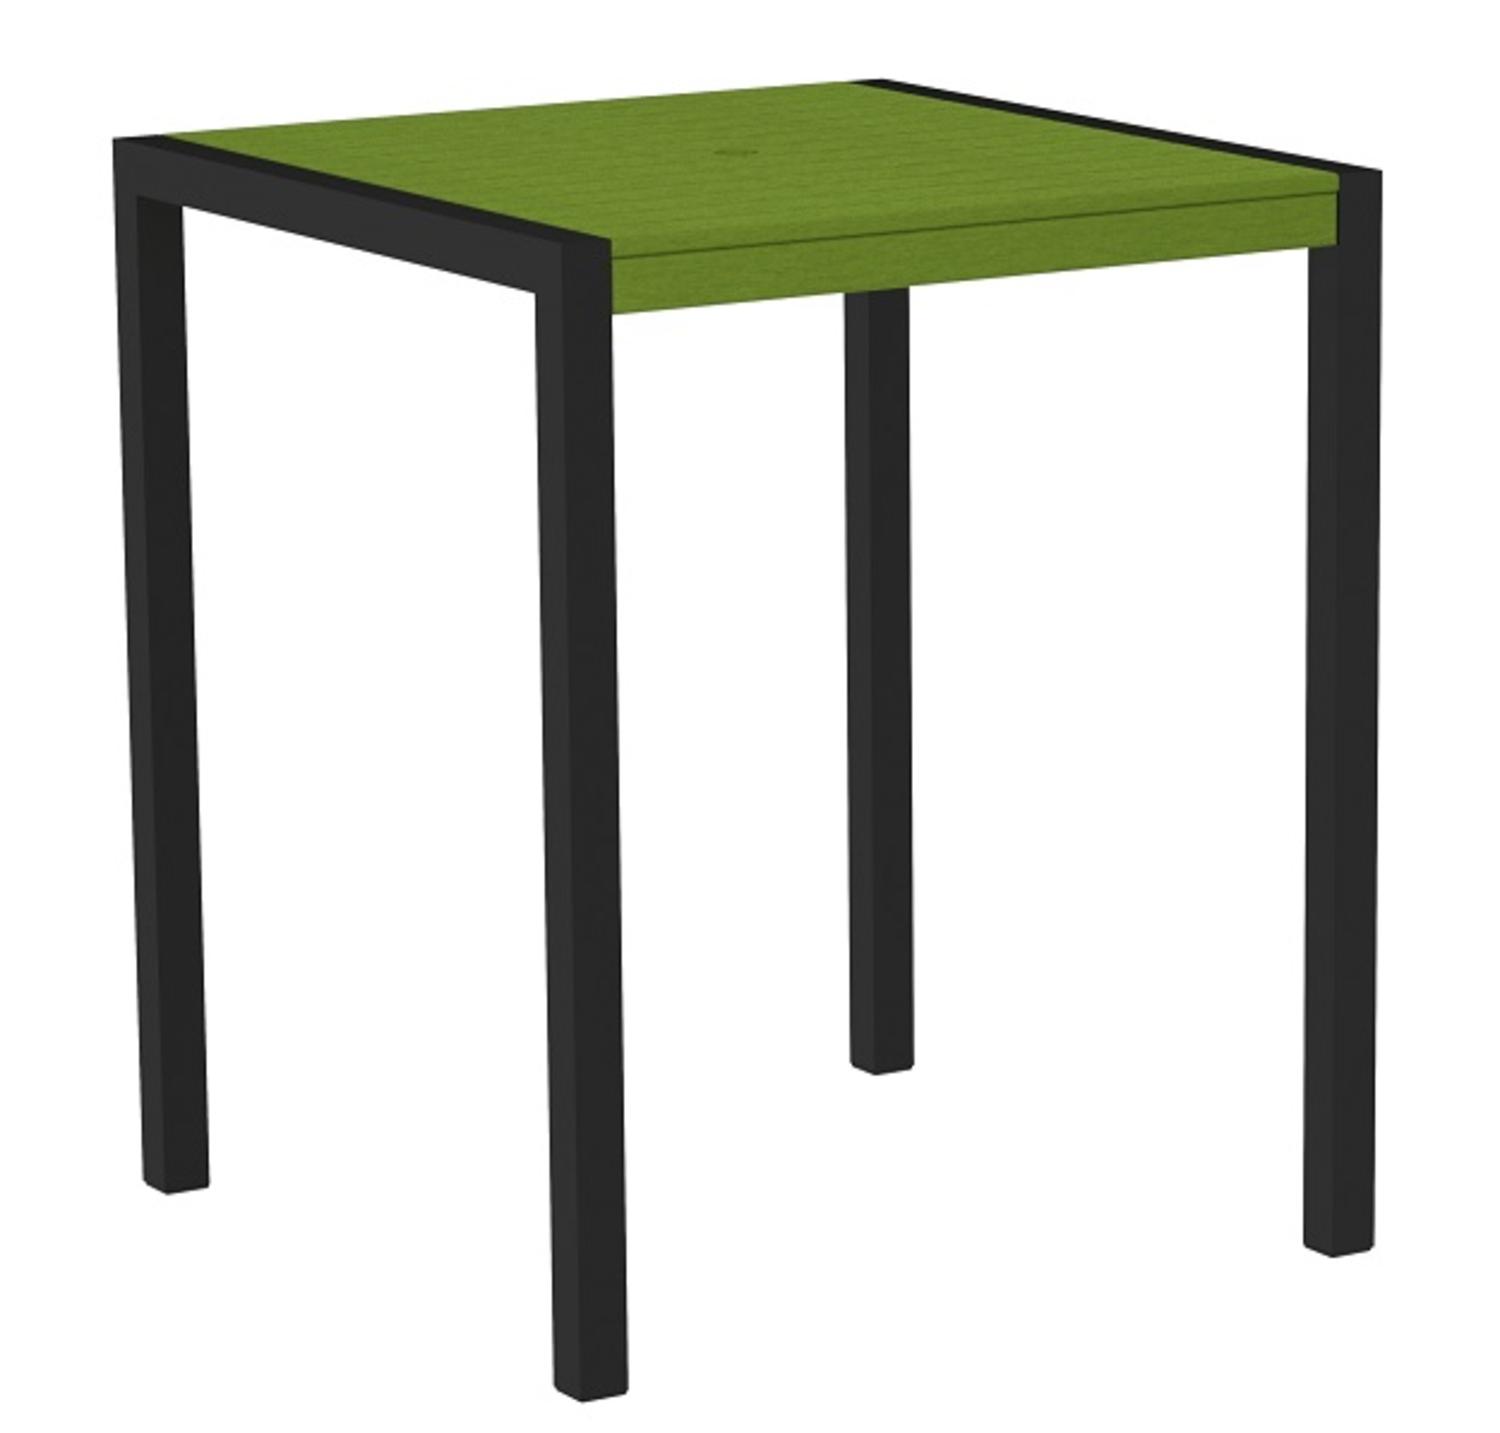 Eco-Friendly Furnishings  42" Outdoor Recycled Earth-Friendly Bar Table - Lime Green with Black Frame